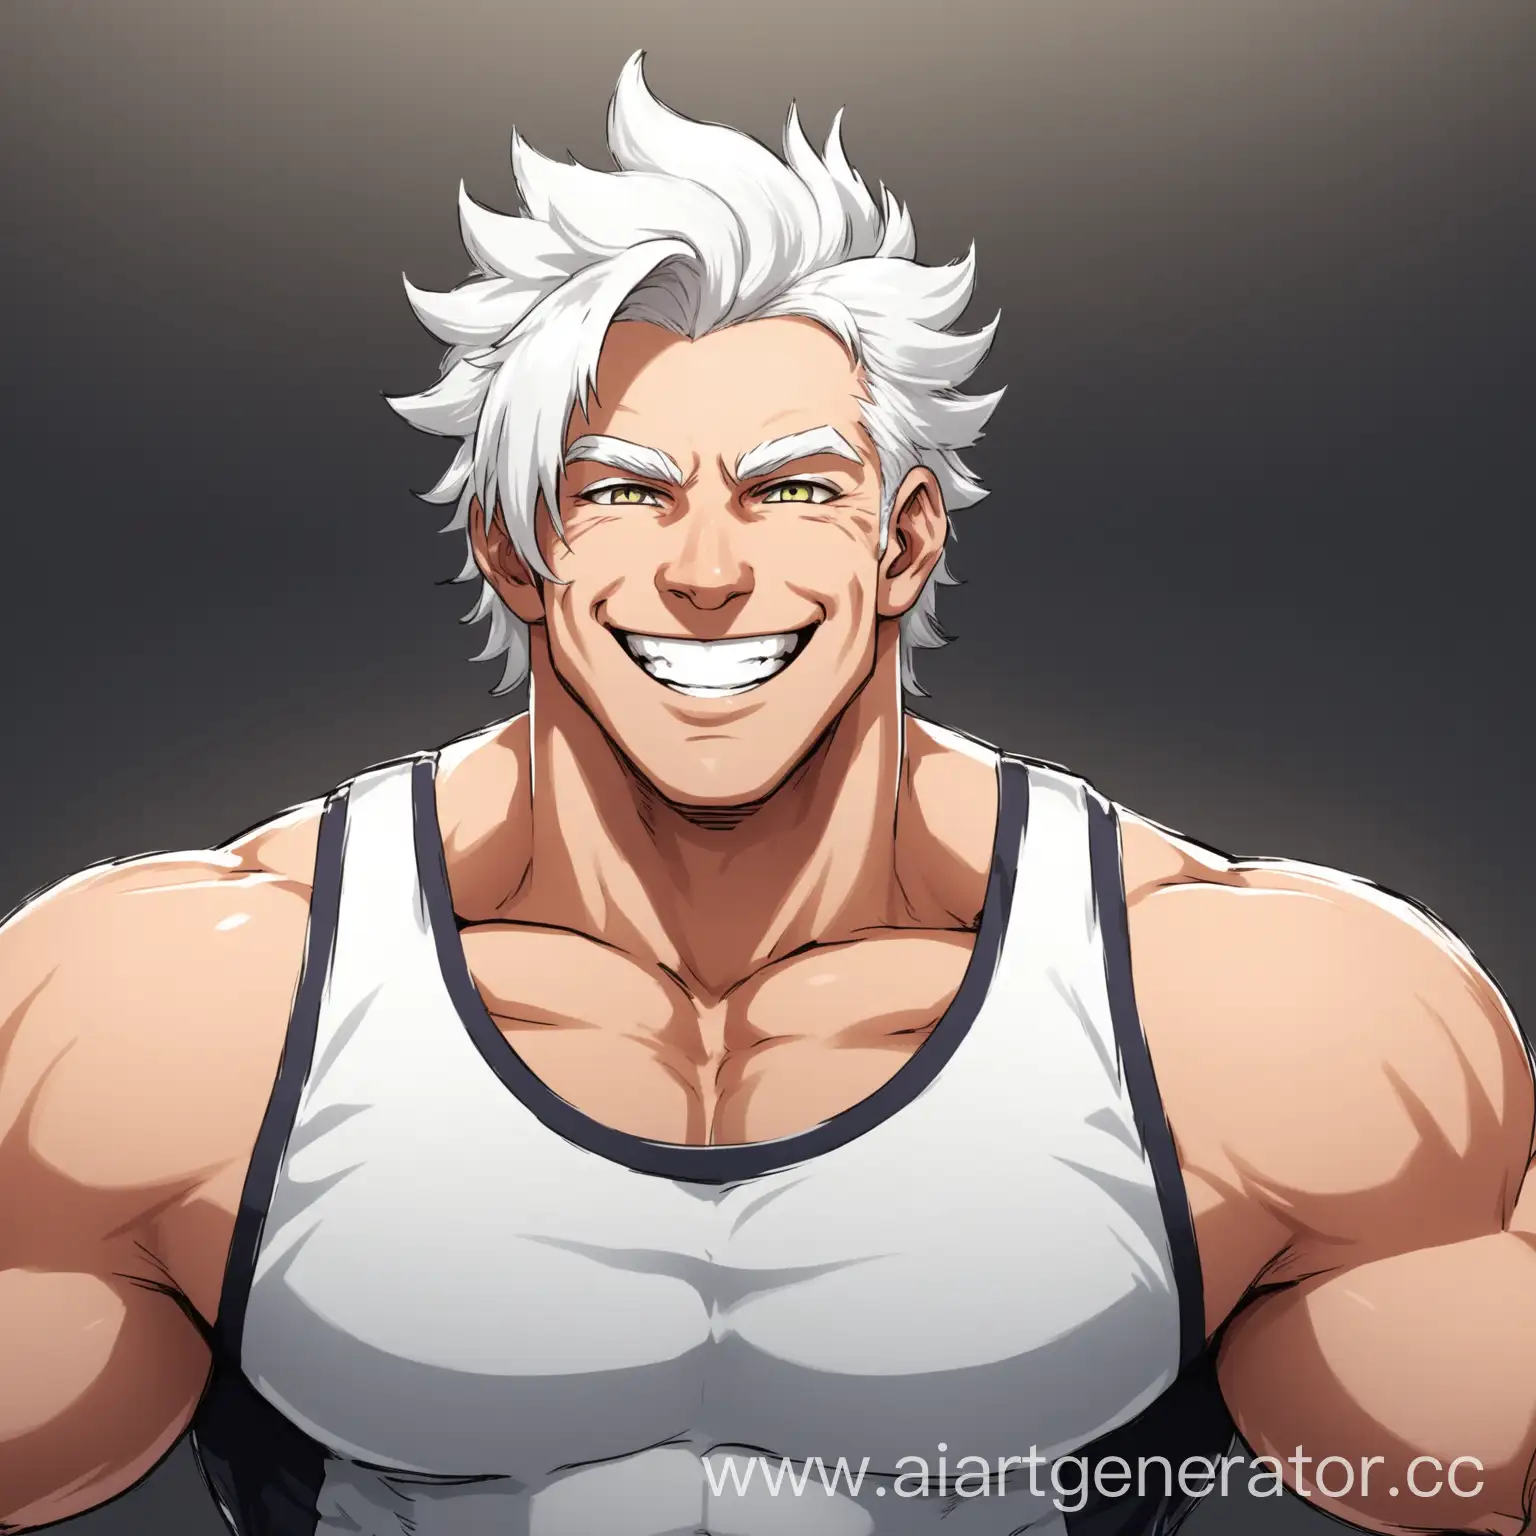 Confident-WhiteHaired-Man-Smiling-with-Pride